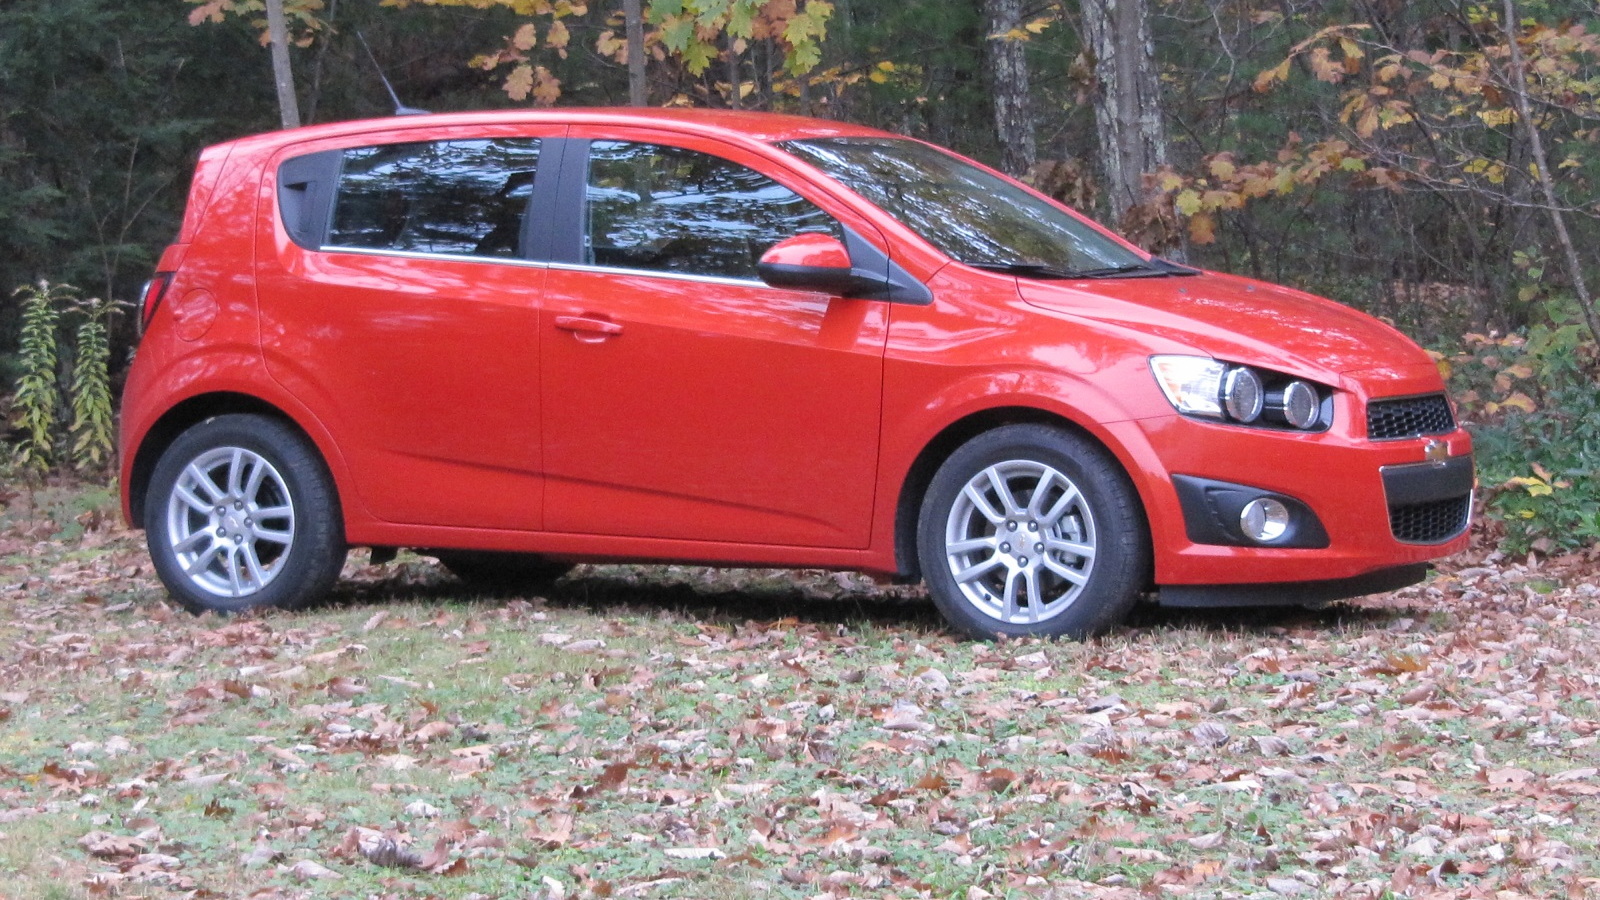 2012 Chevrolet Sonic hatchback, road test, Catskill Mountains, Oct 2011